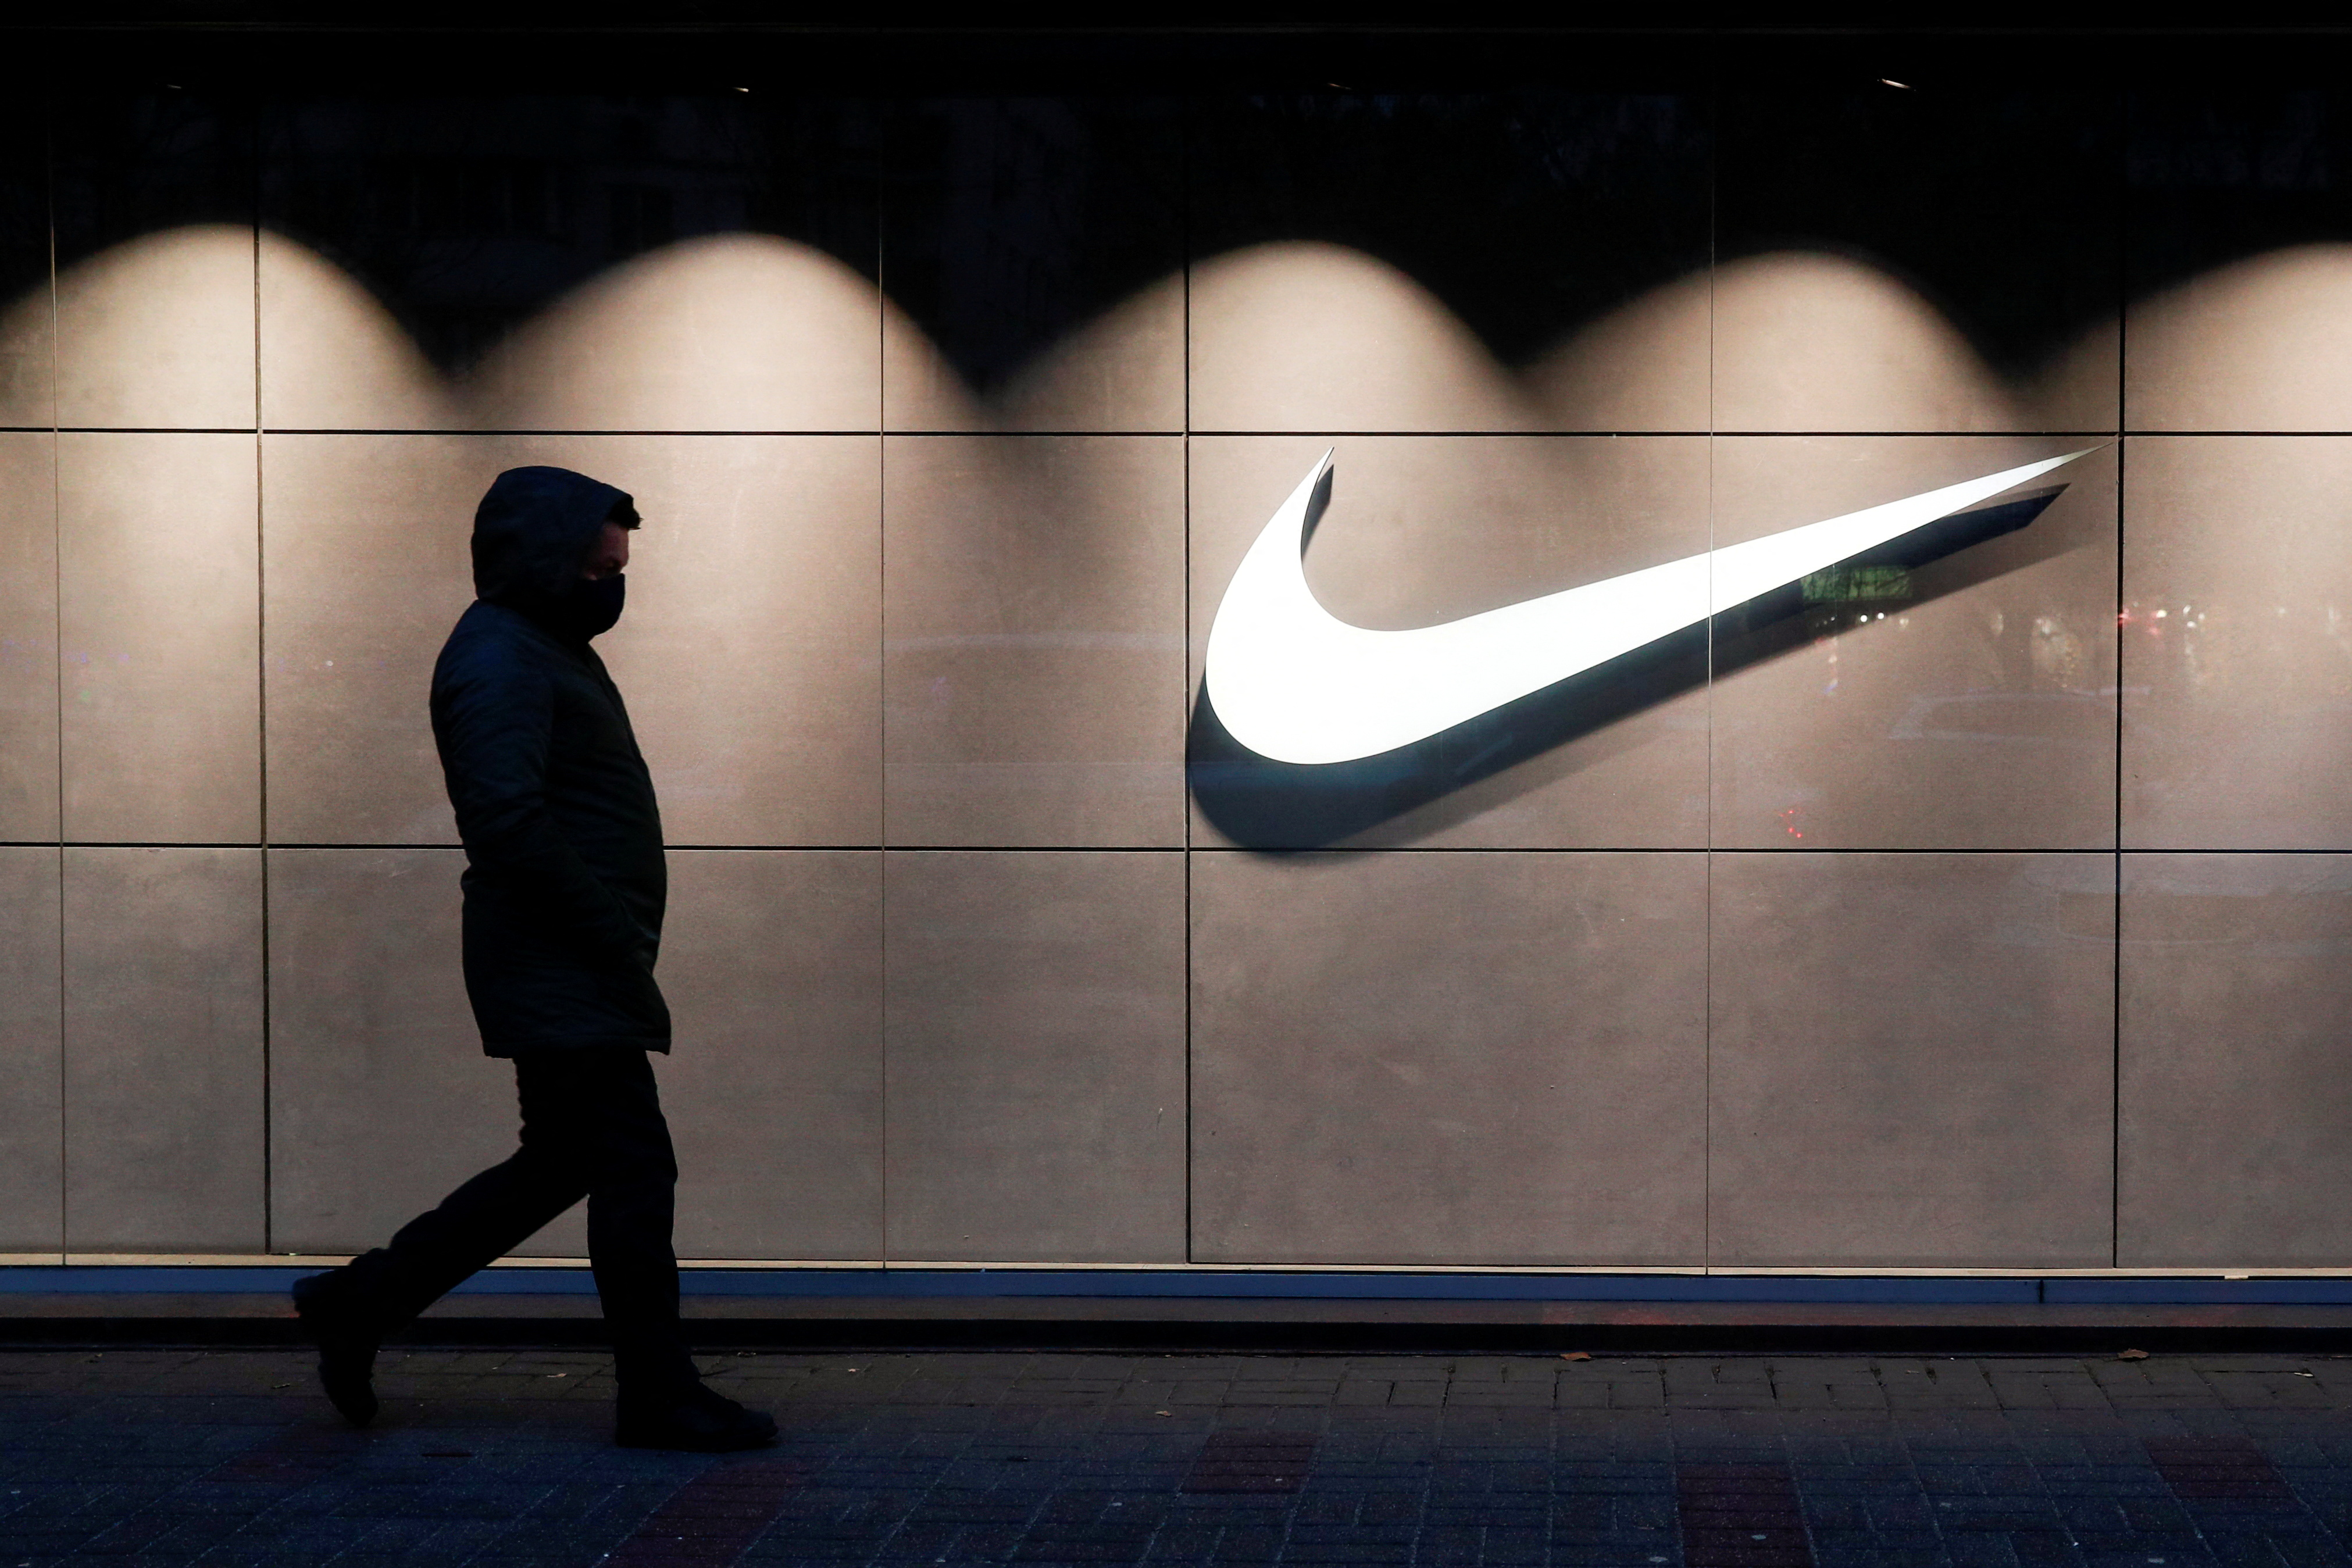 Nike stock tumbles 12% on lowered revenue outlook; Anayst cuts rating